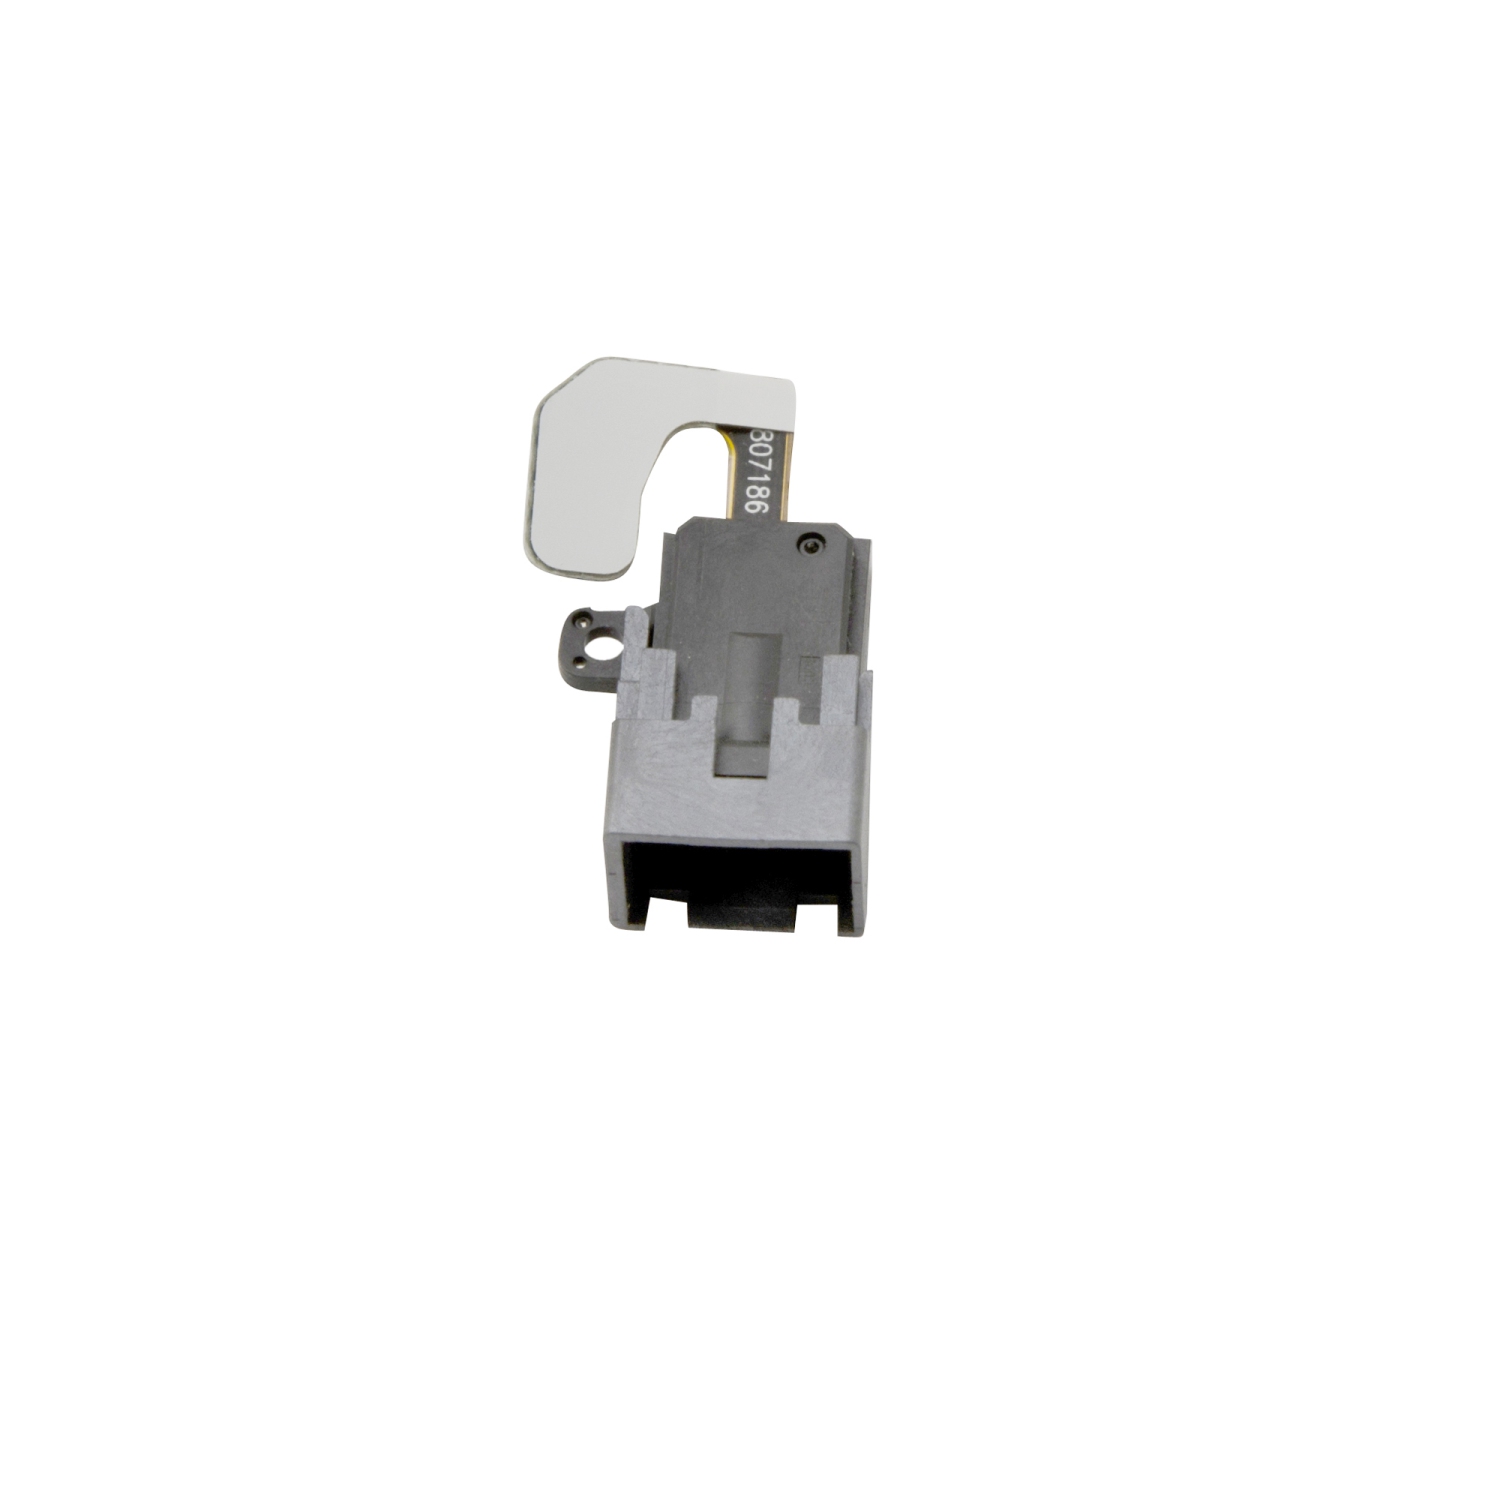 Samsung Galaxy Note 9 Headphone Jack 3.5mm Replacement